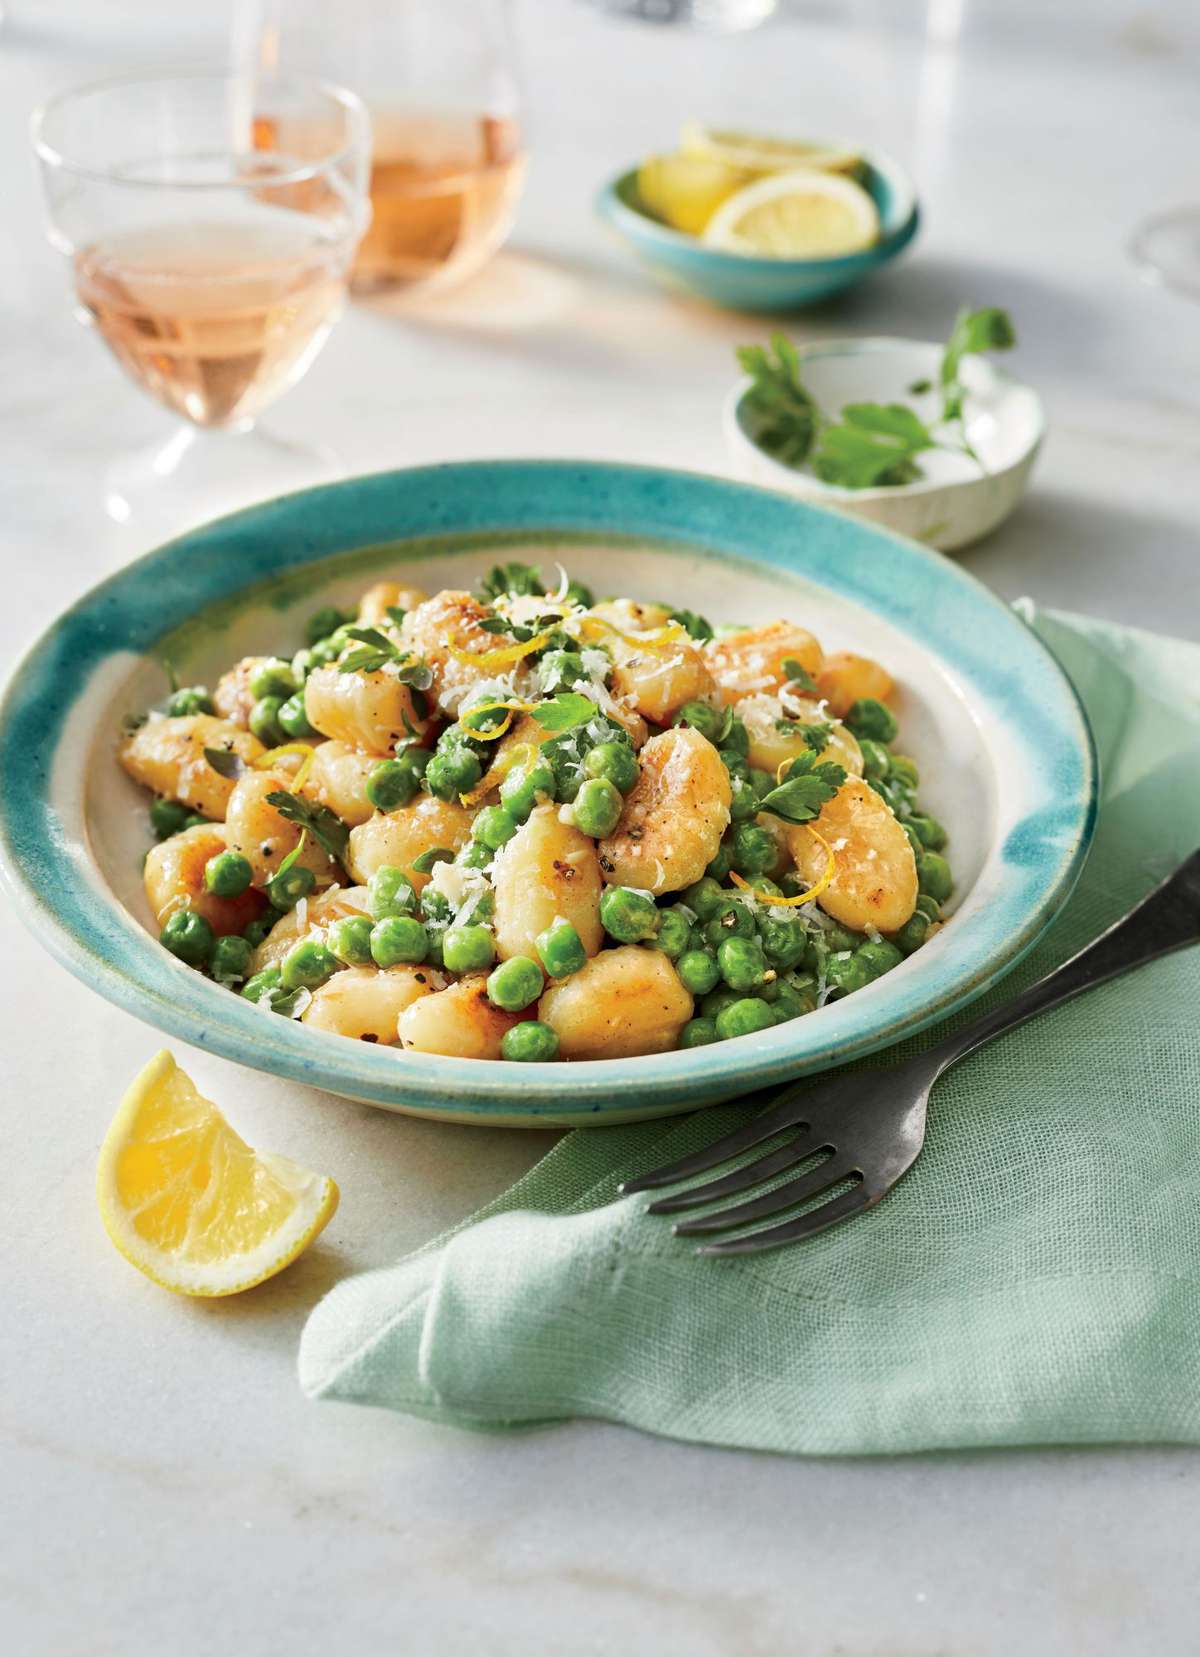 Skillet-Toasted Gnocchi with Peas Recipe 